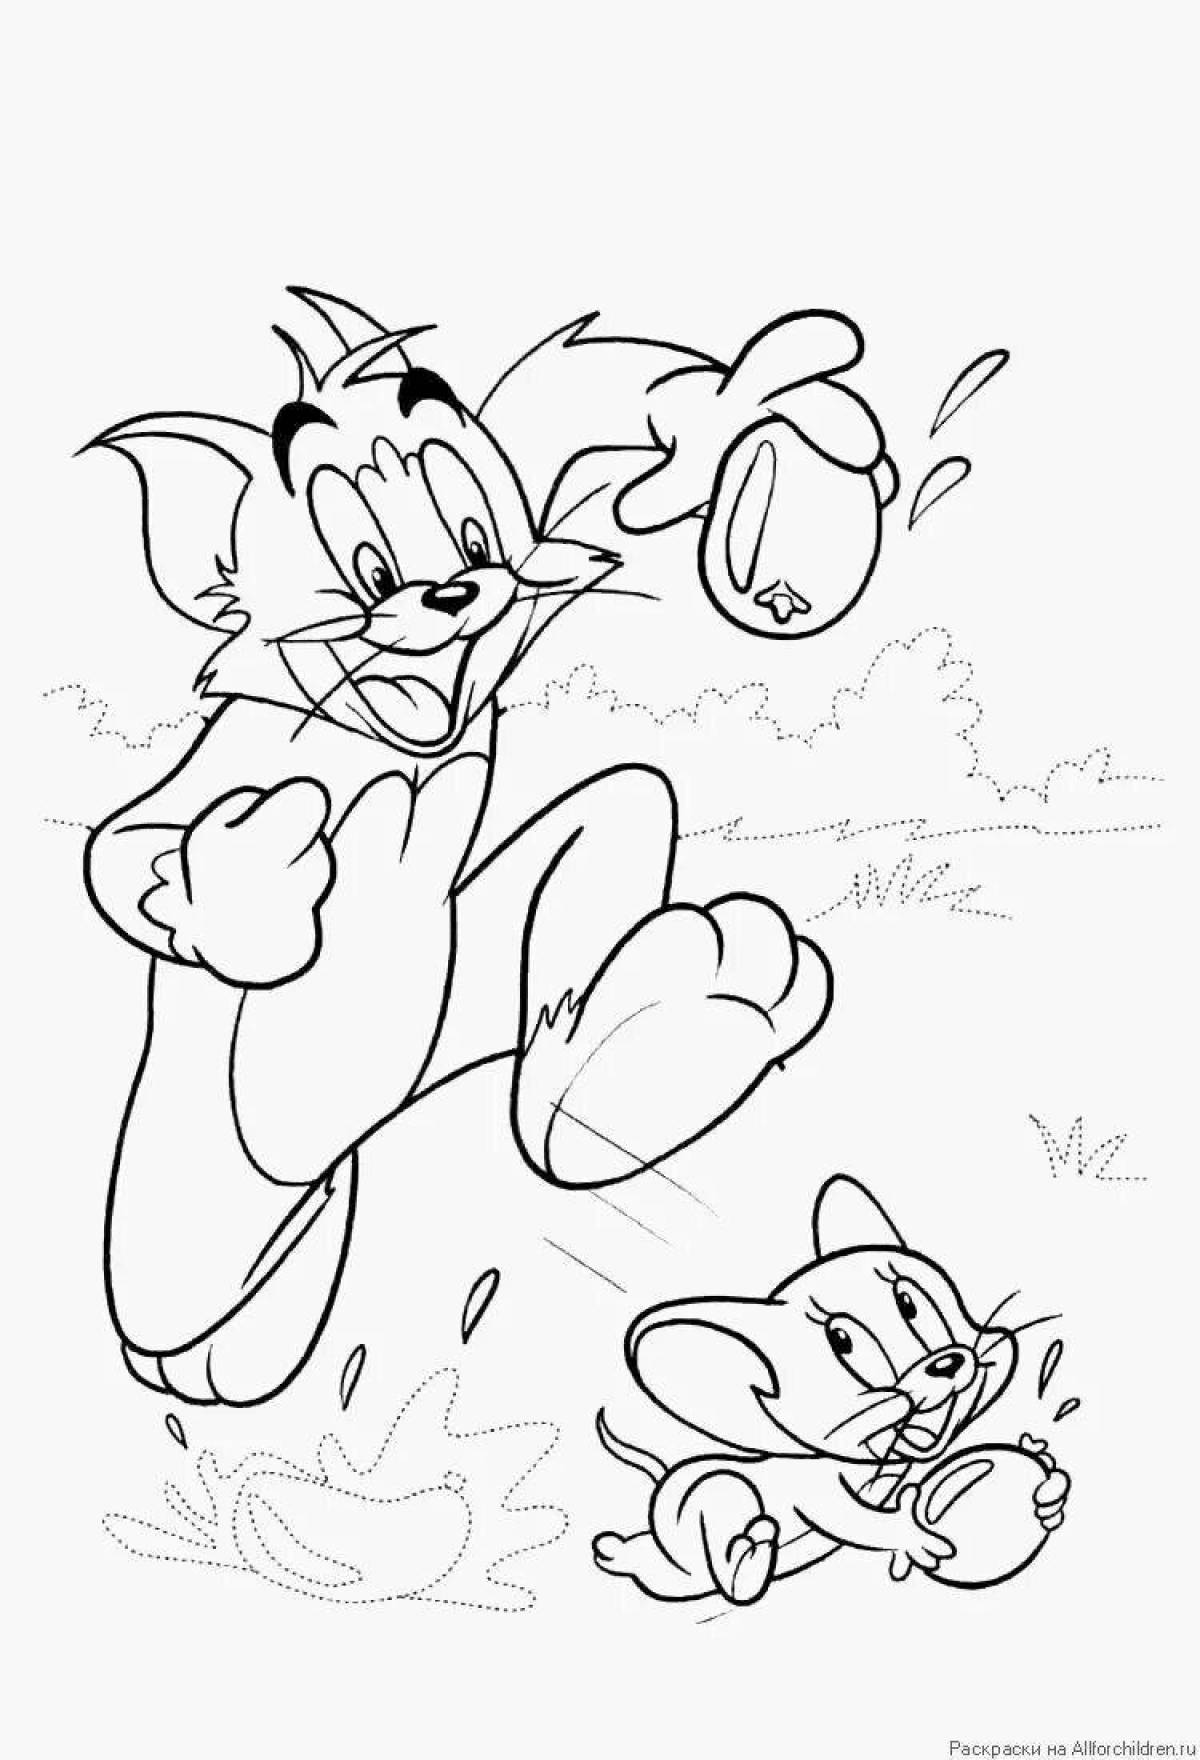 Coloring tom and jerry imaginative